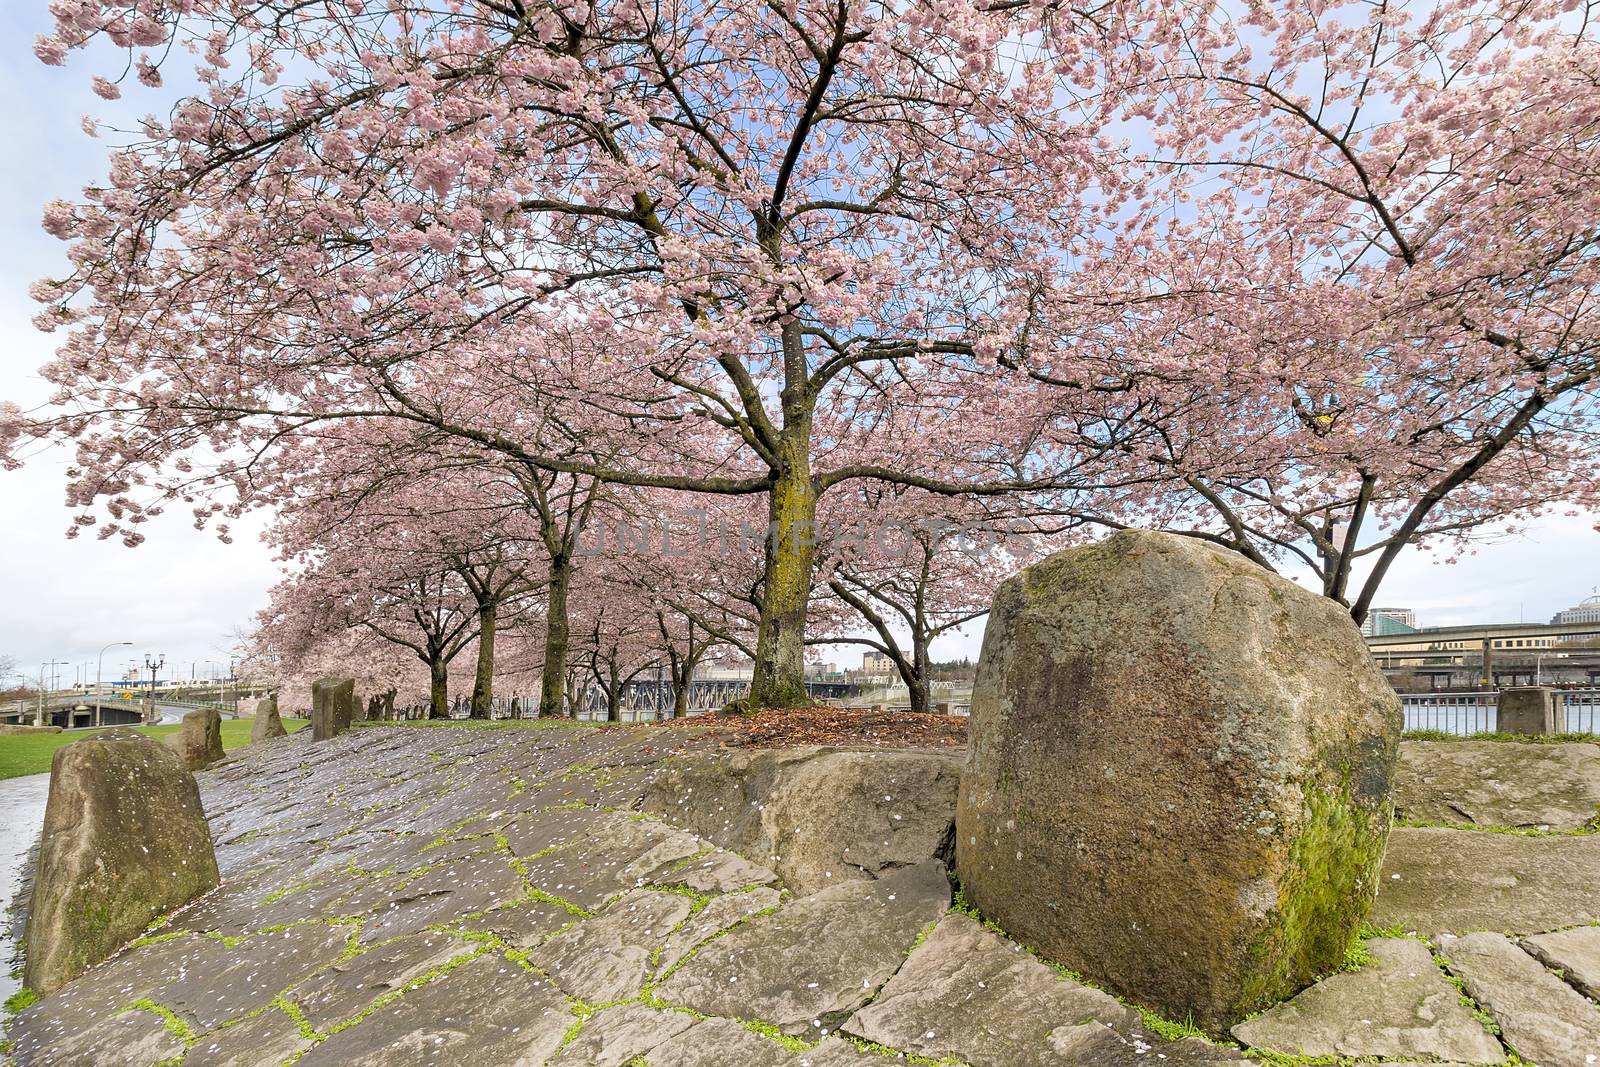 Cherry Blossom Trees with Pink Flowers in full bloom with large rock boulders hardscape at waterfront park in Portland Oregon